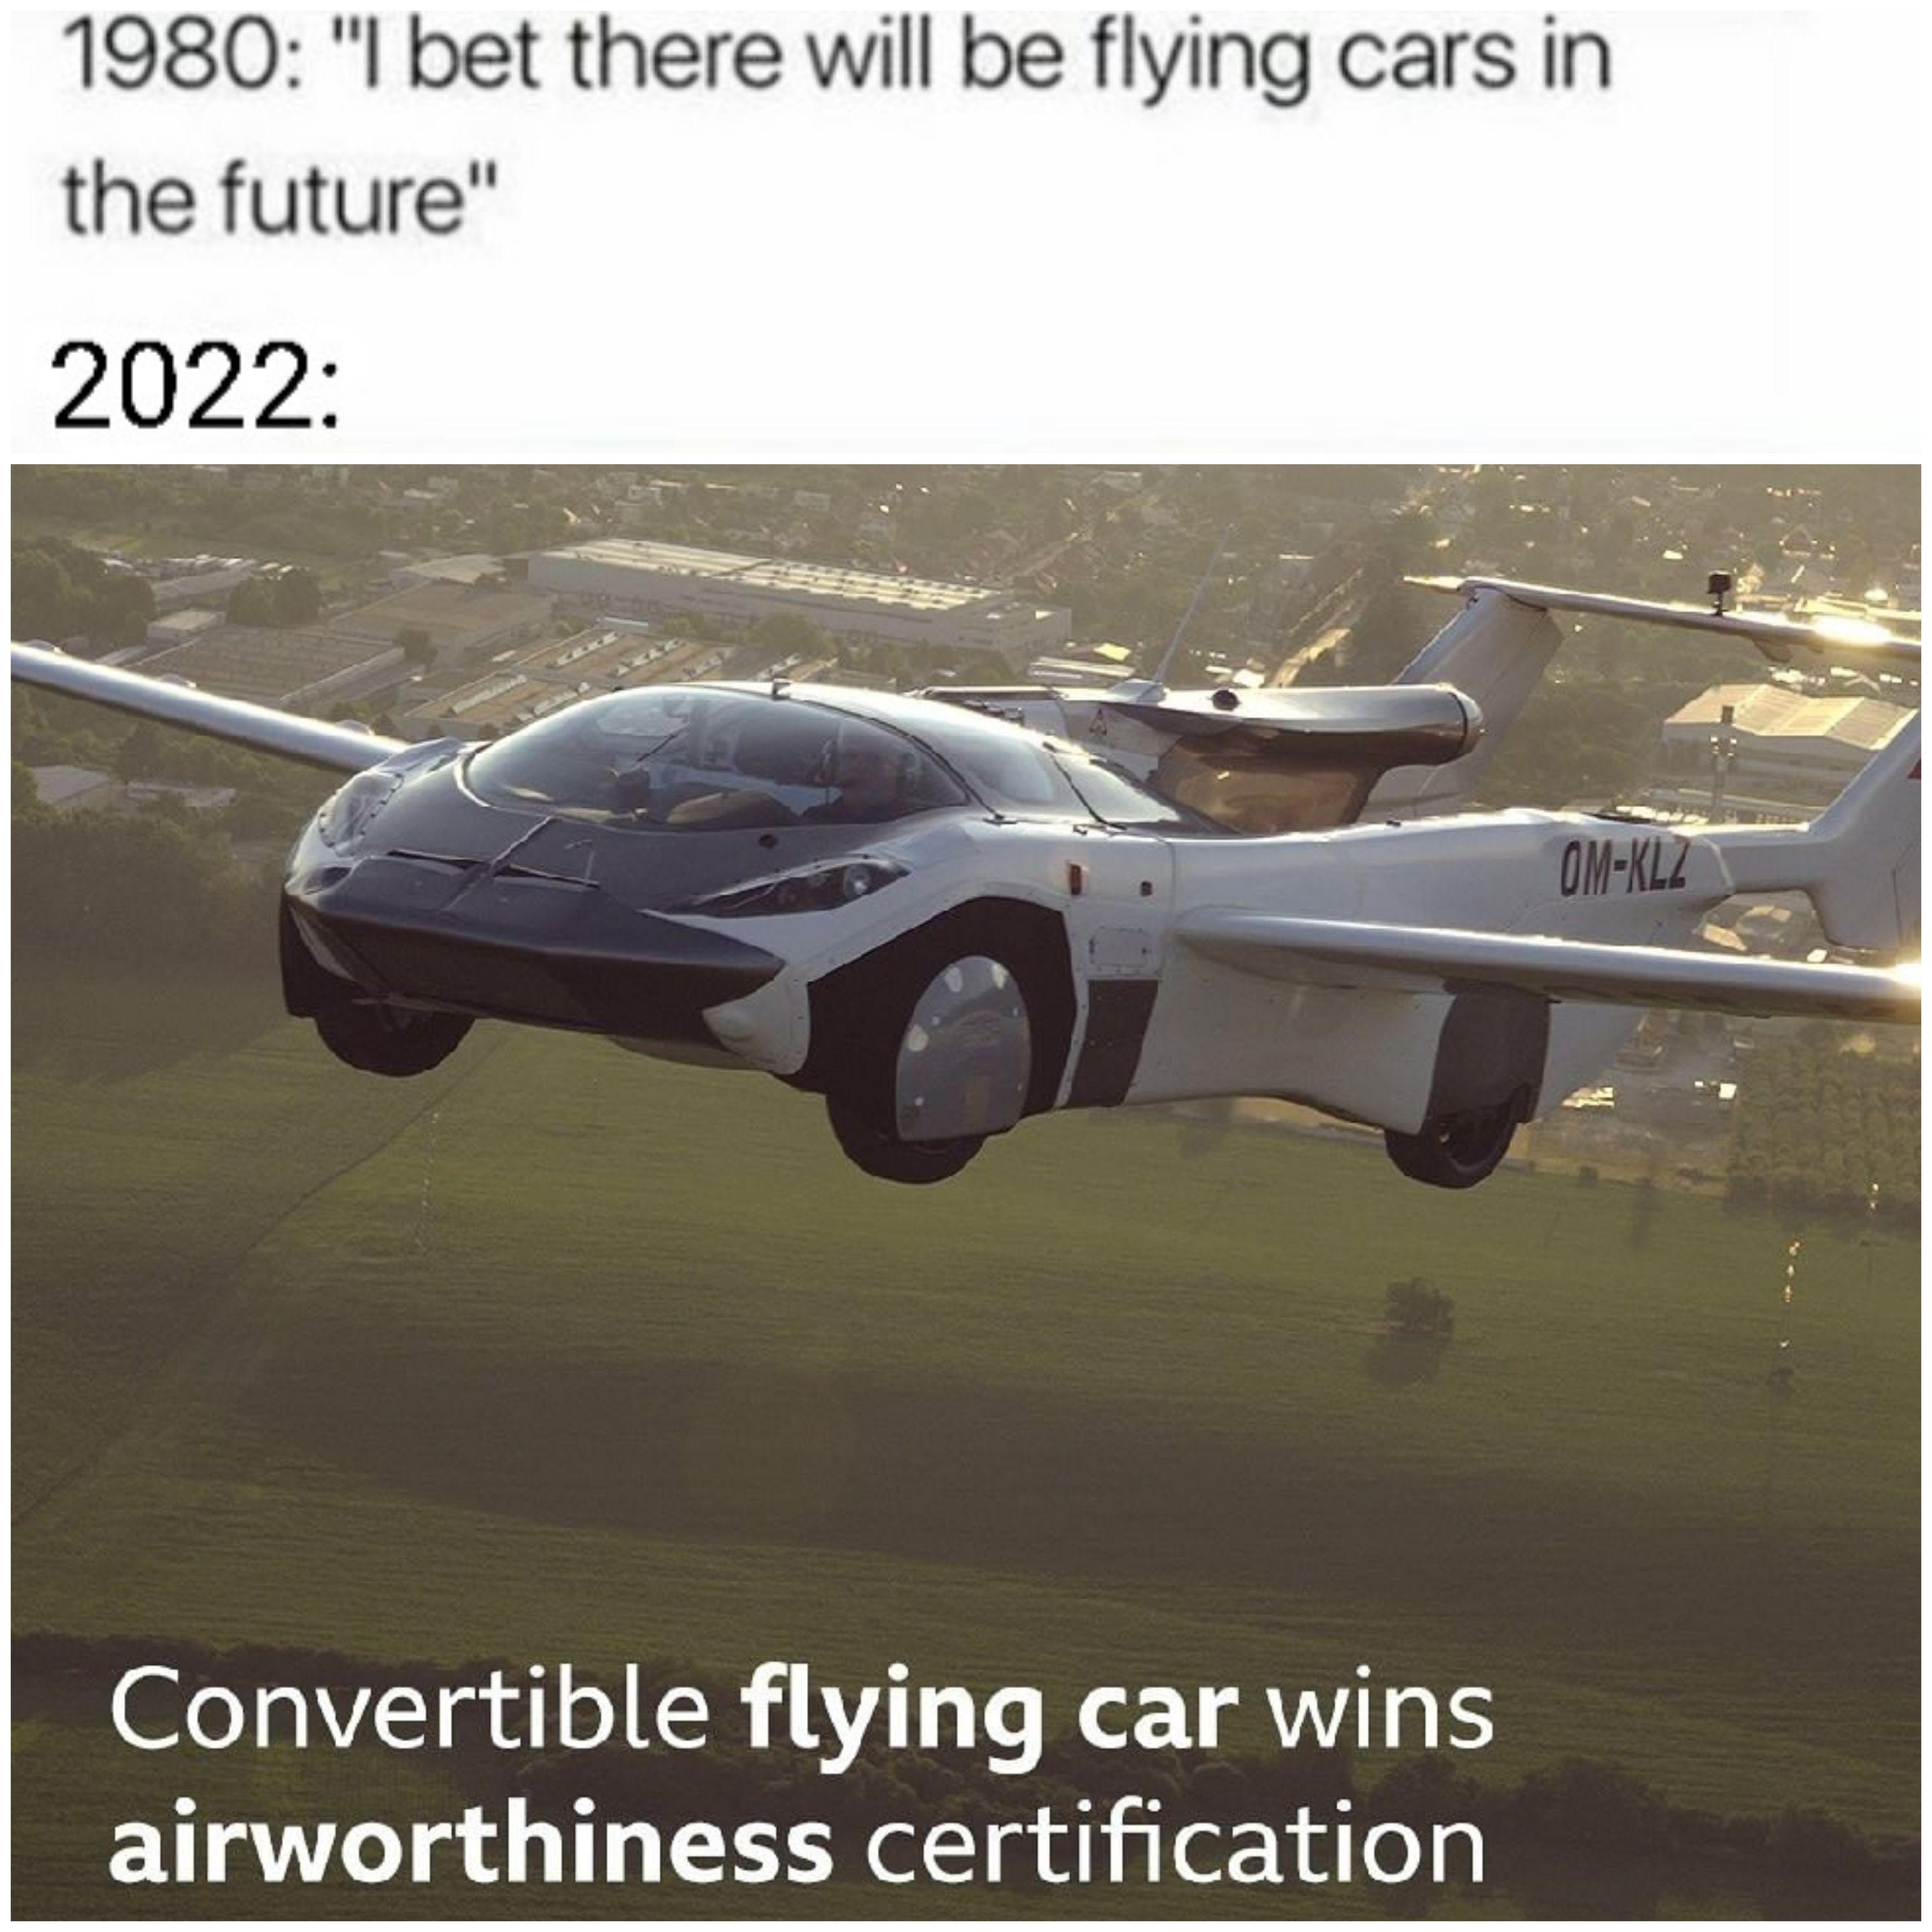 flying car test flight - 1980 "I bet there will be flying cars in the future" 2022 OmKL2 Convertible flying car wins airworthiness certification